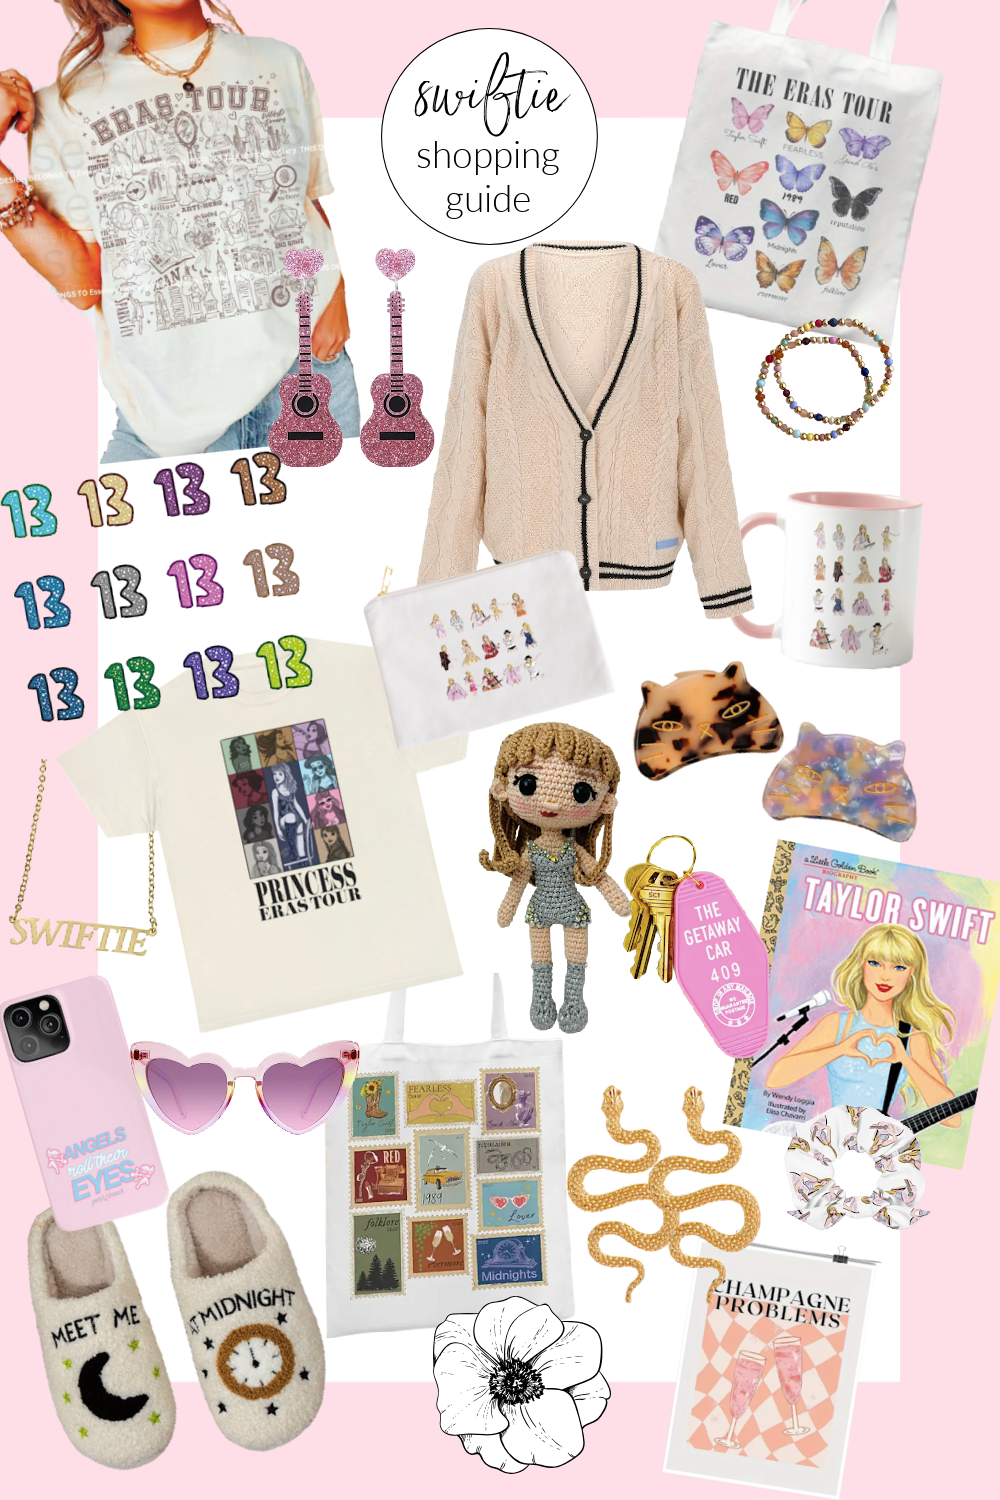 Shopping Guide for Swifties, Julie Leah